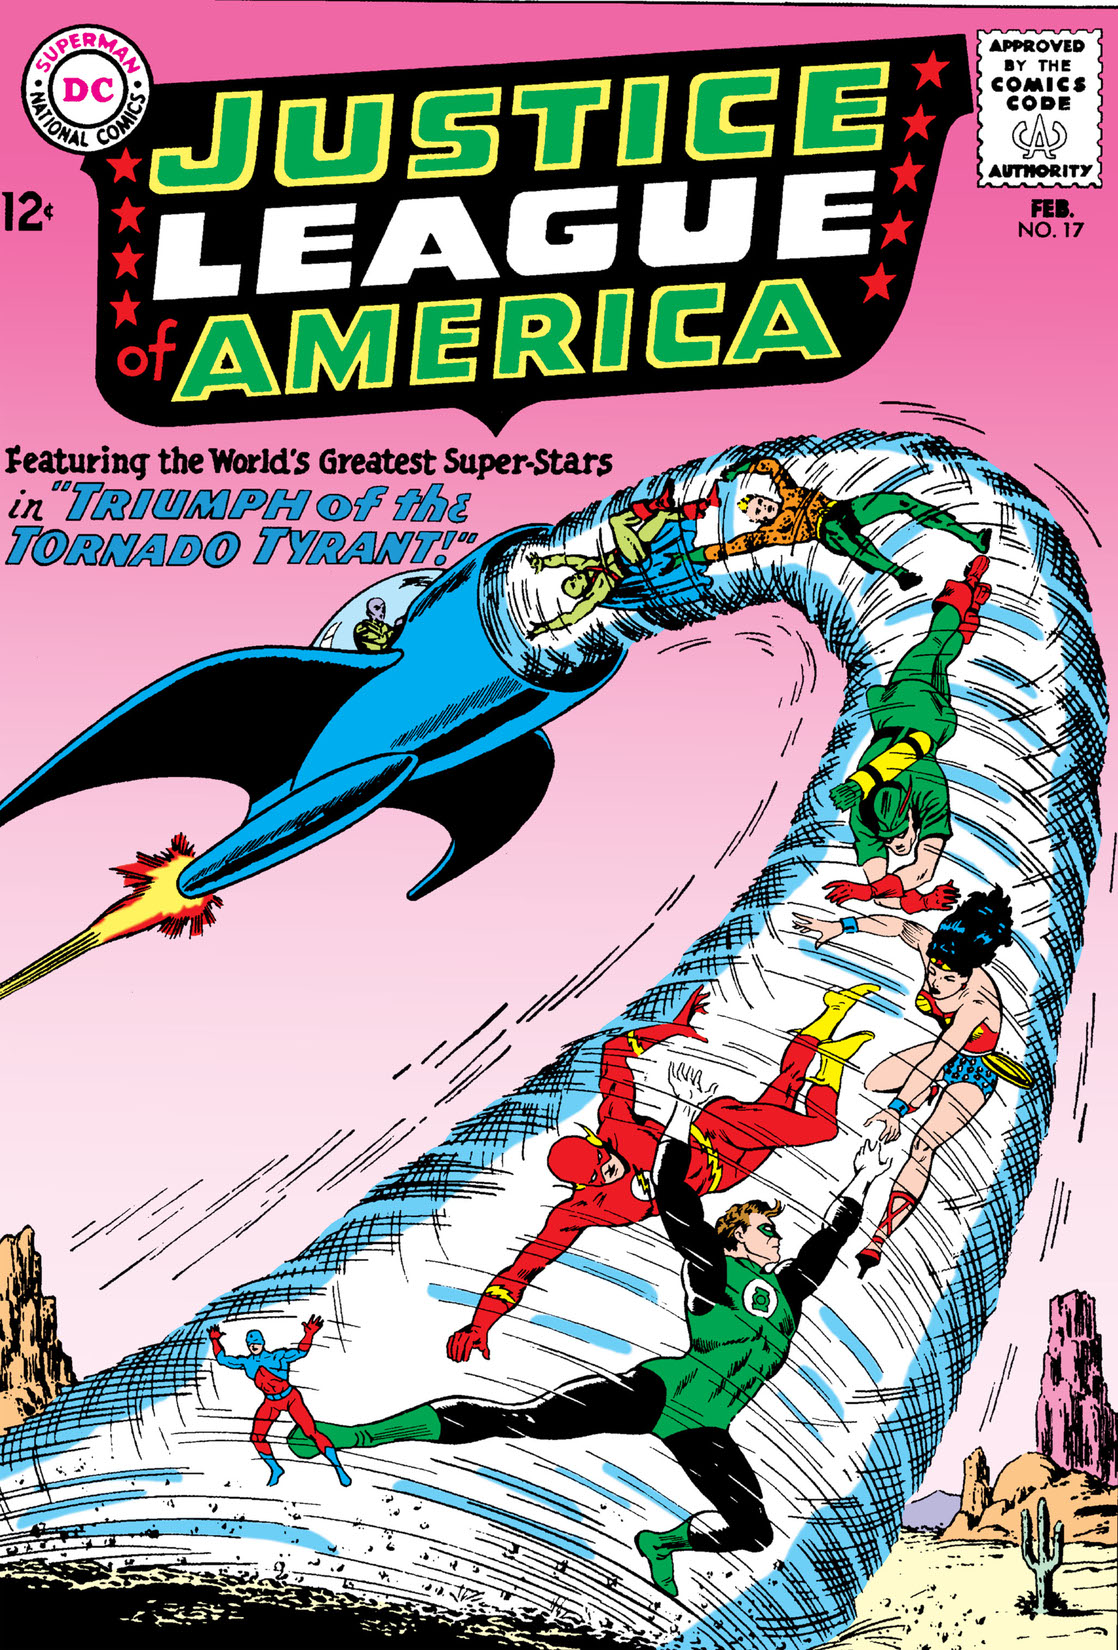 Justice League of America (1960-) #17 preview images